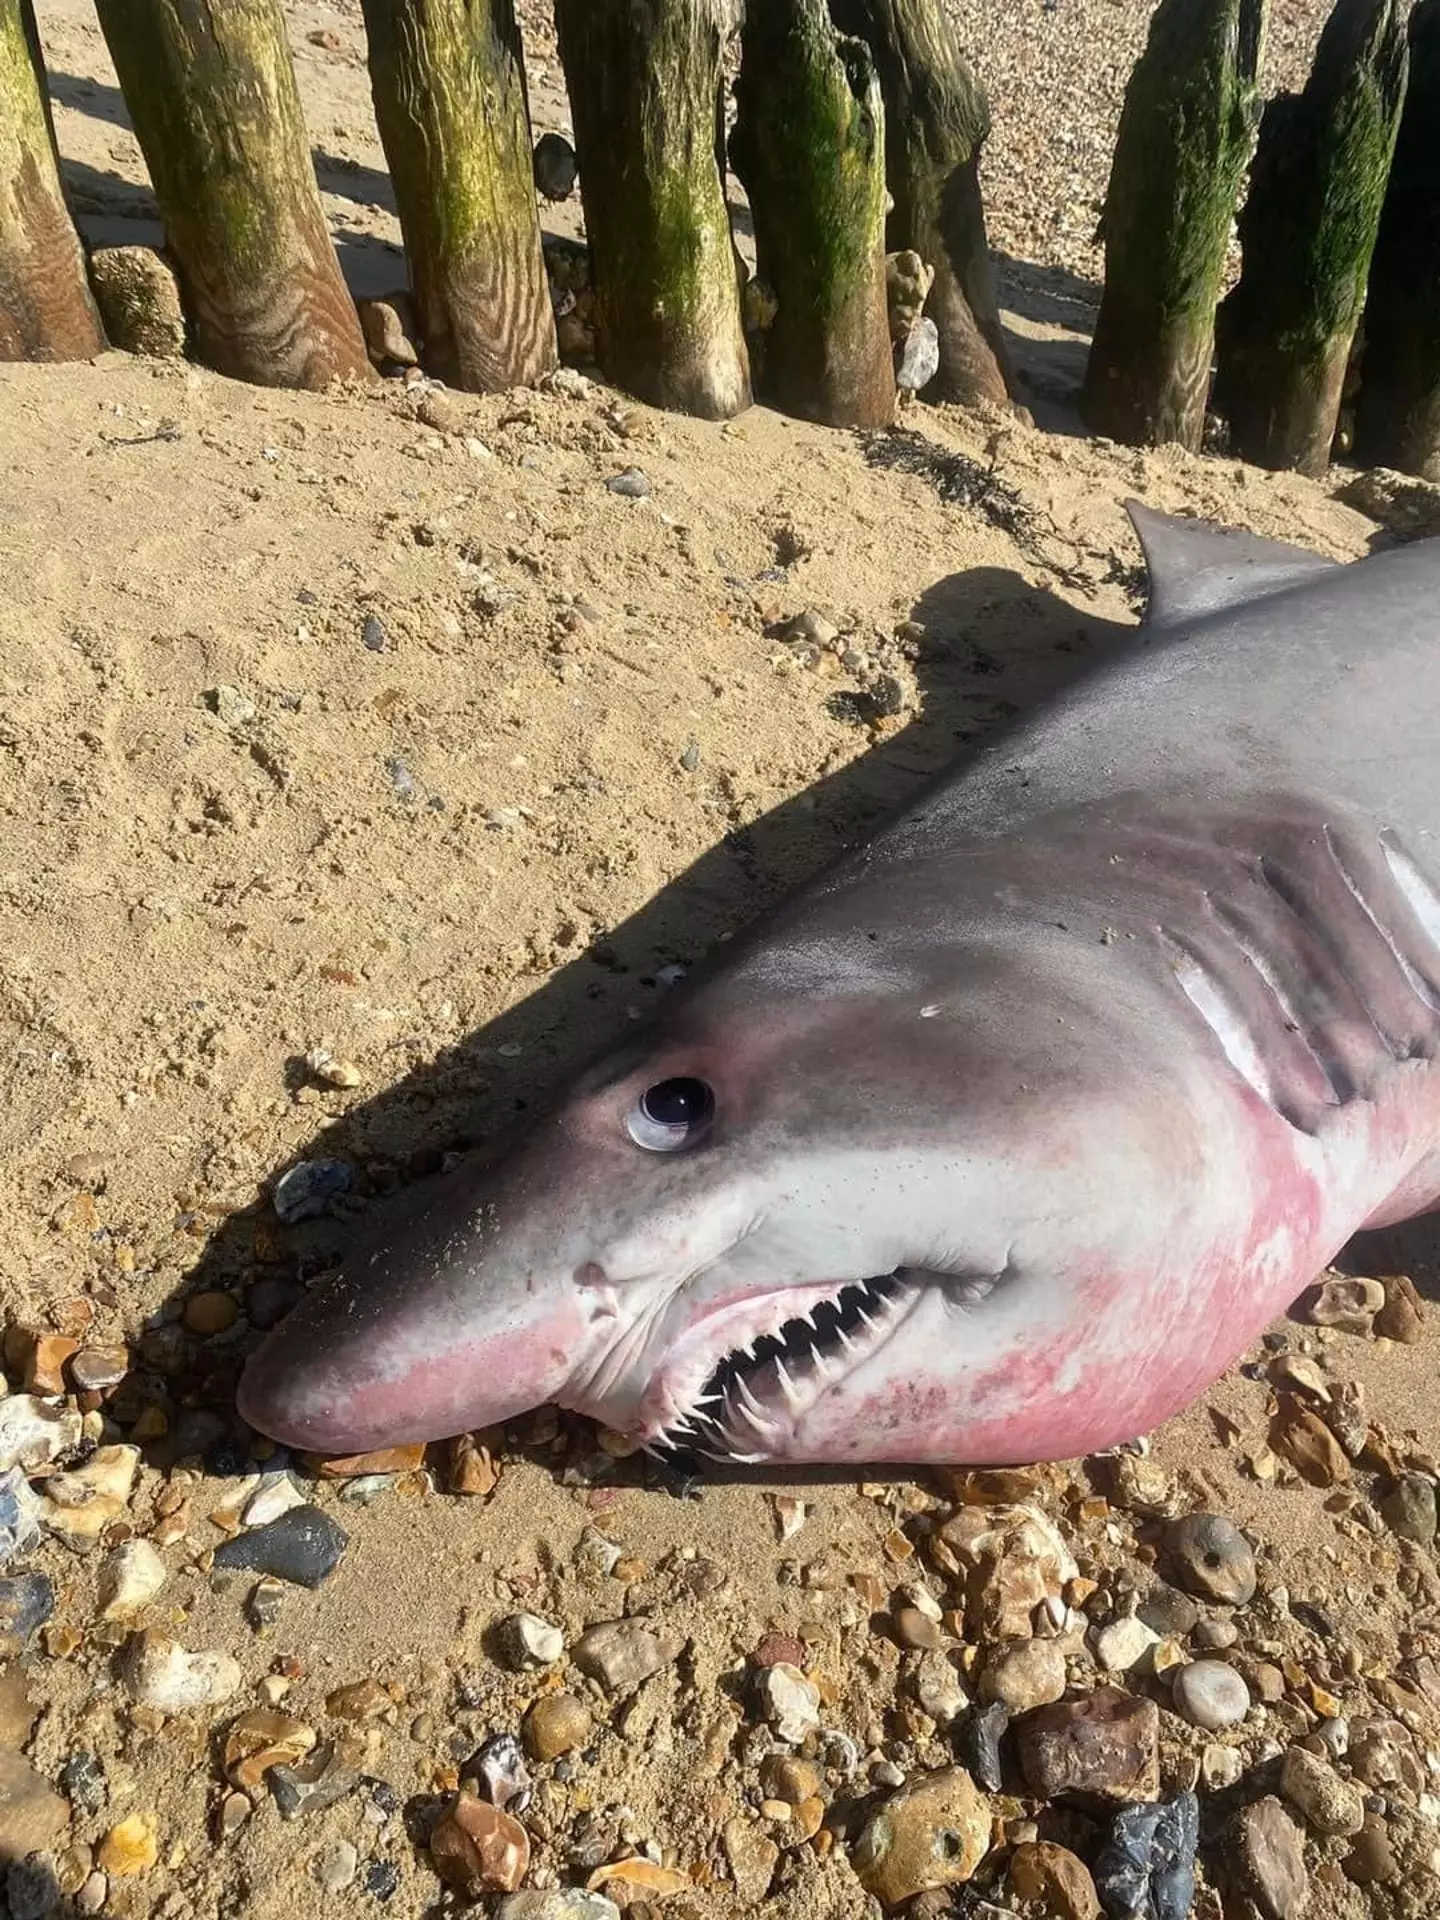 The large shark came ashore at Lepe beach in Hampshire.